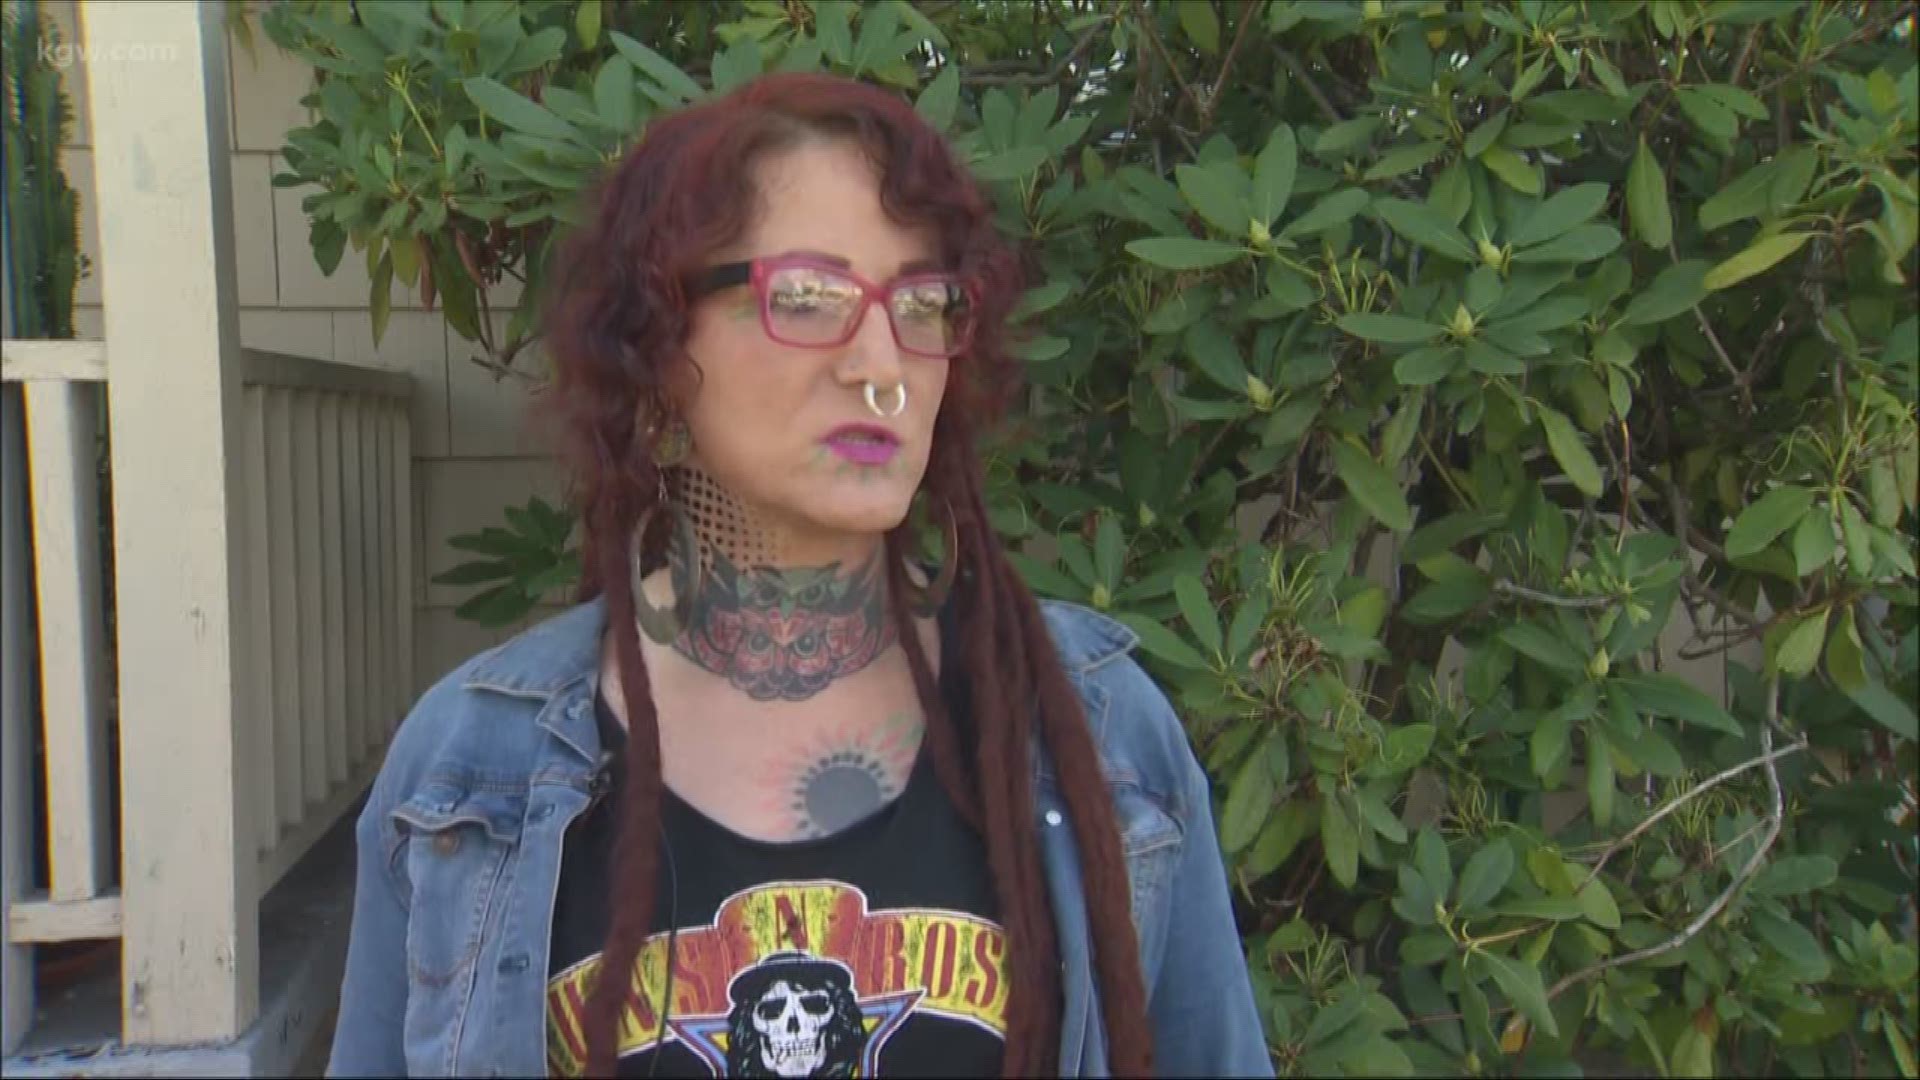 Lyft driver says she was attacked because she is transgender